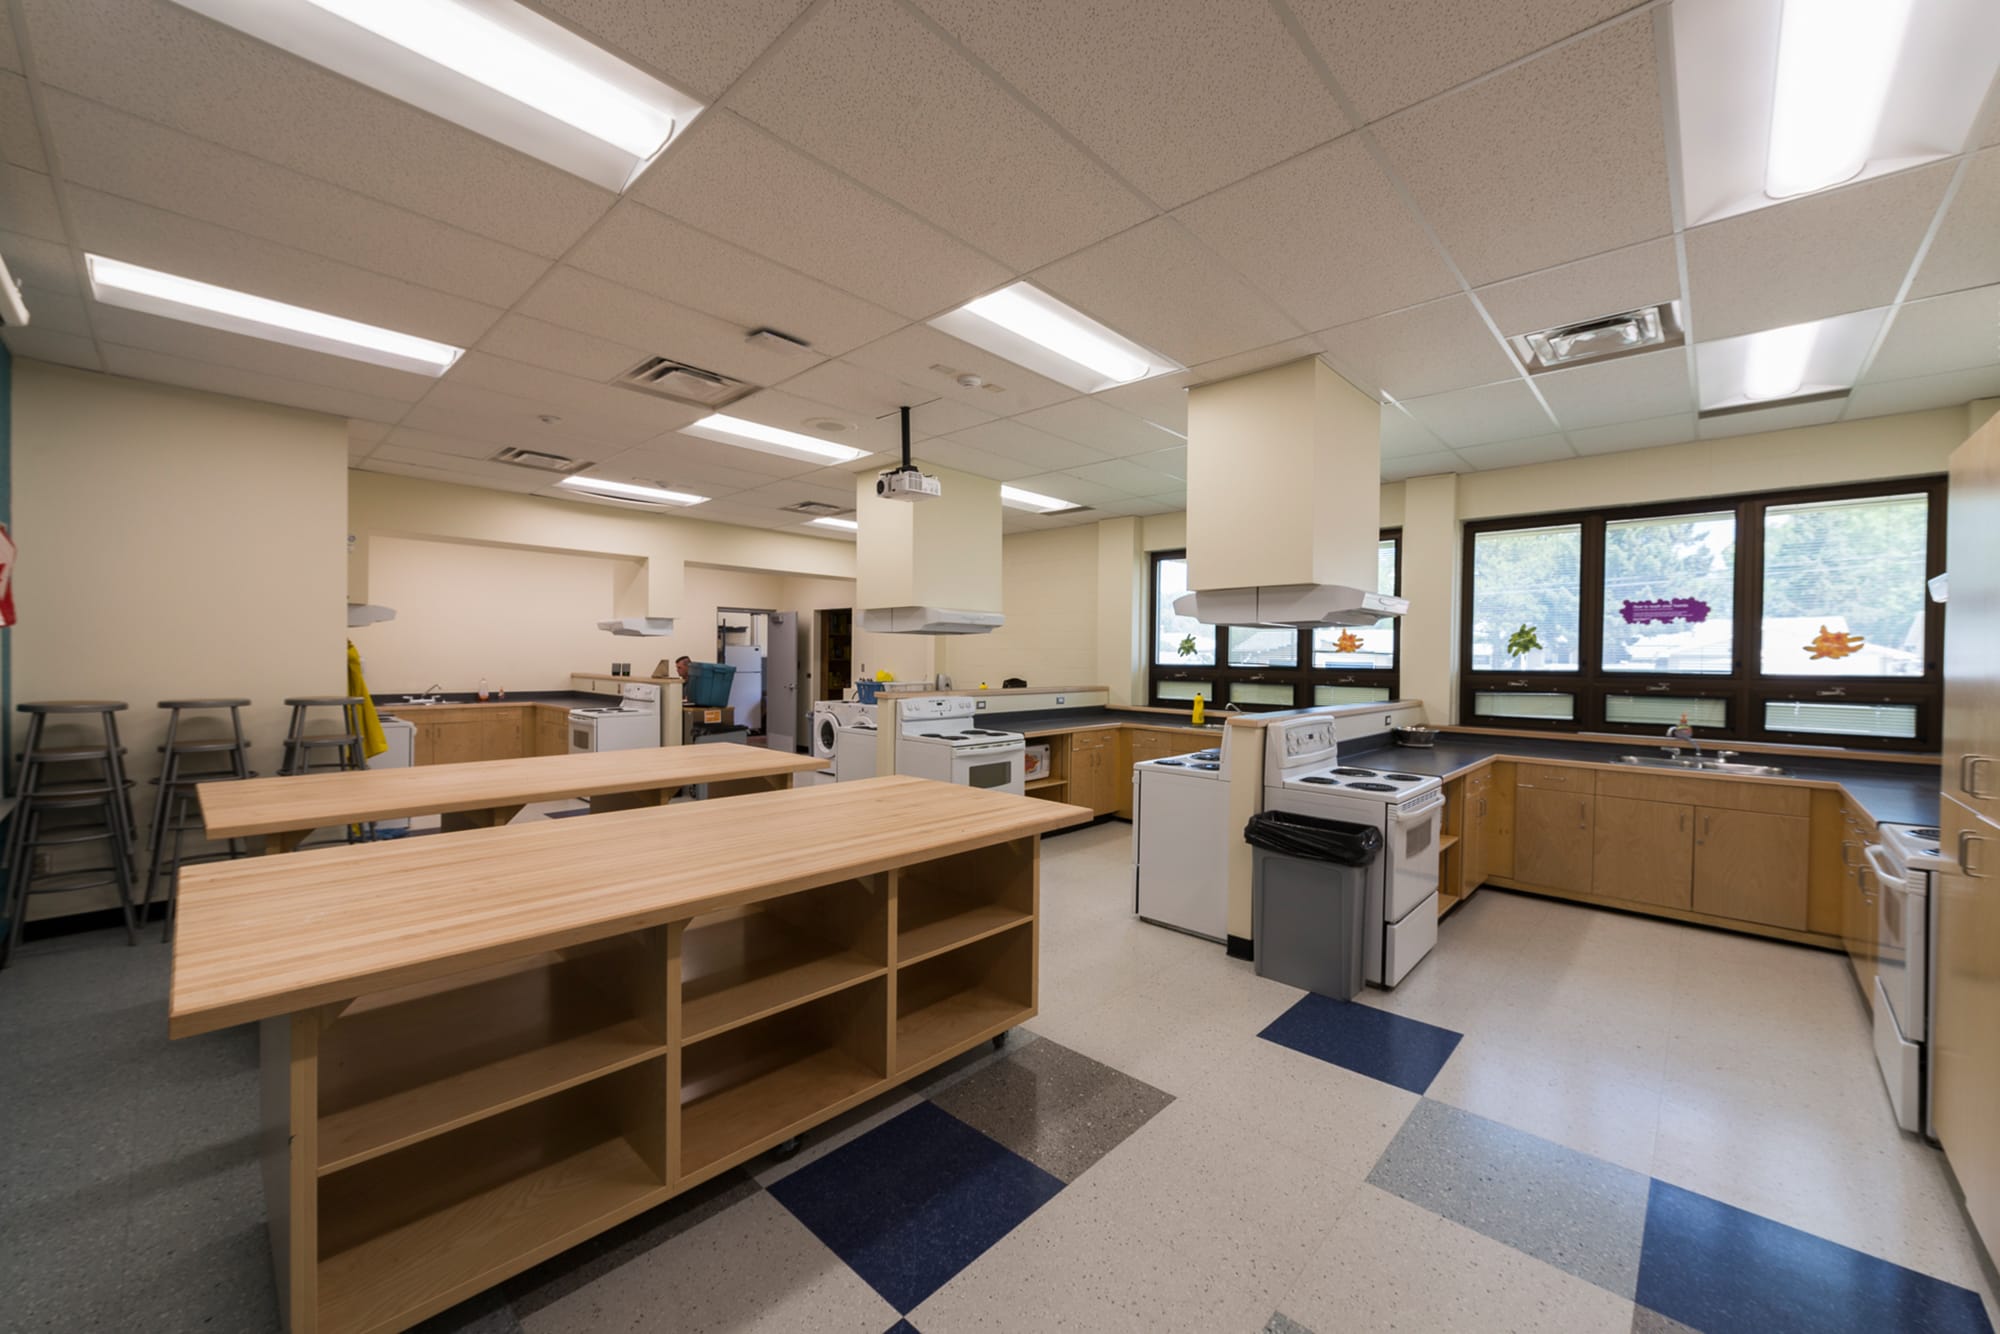 Our Lady of Mount Pleasant School interior cooking lab